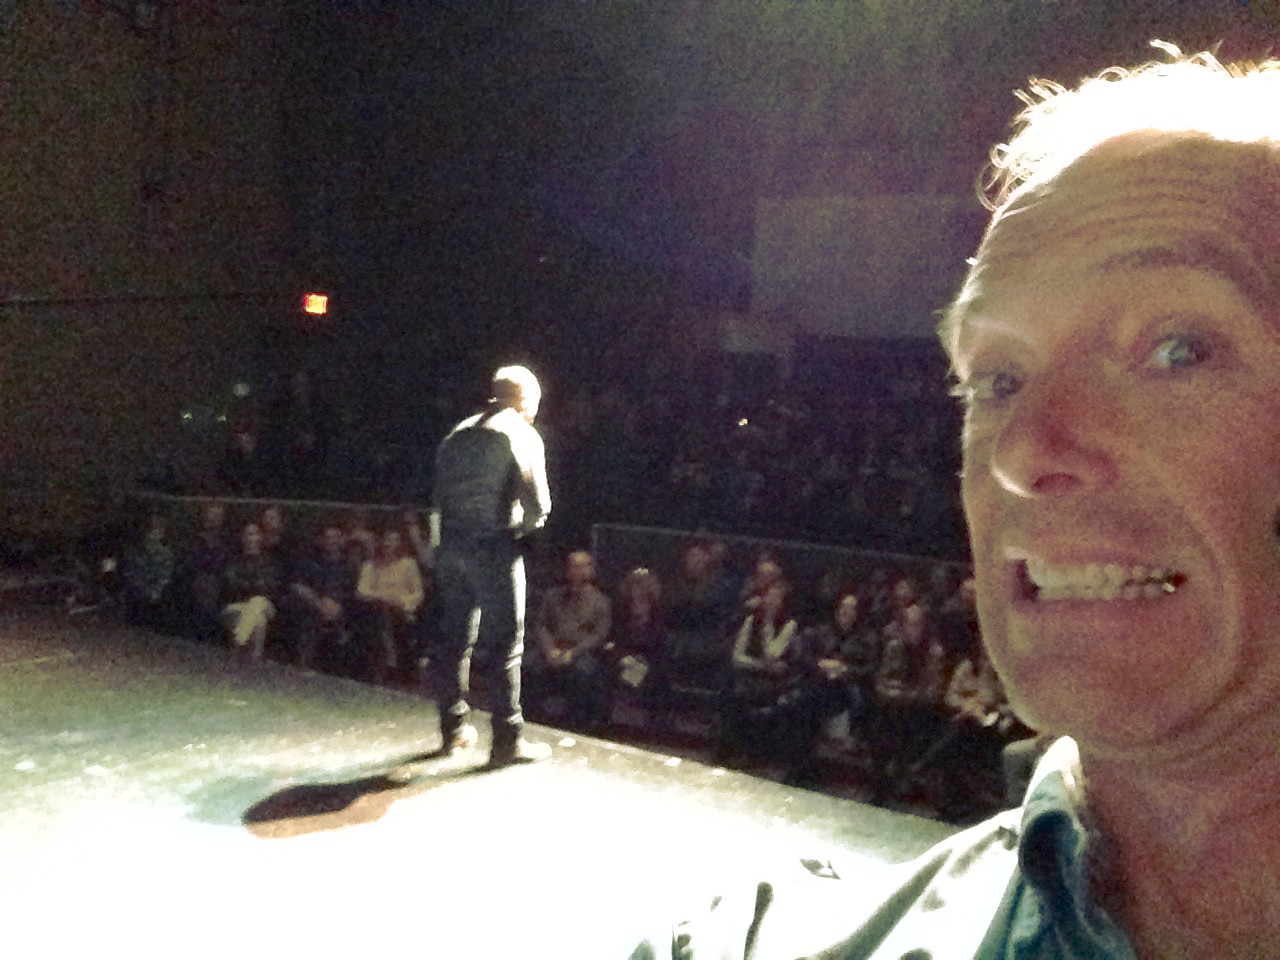 A selfie from the stage creates a ruckus.